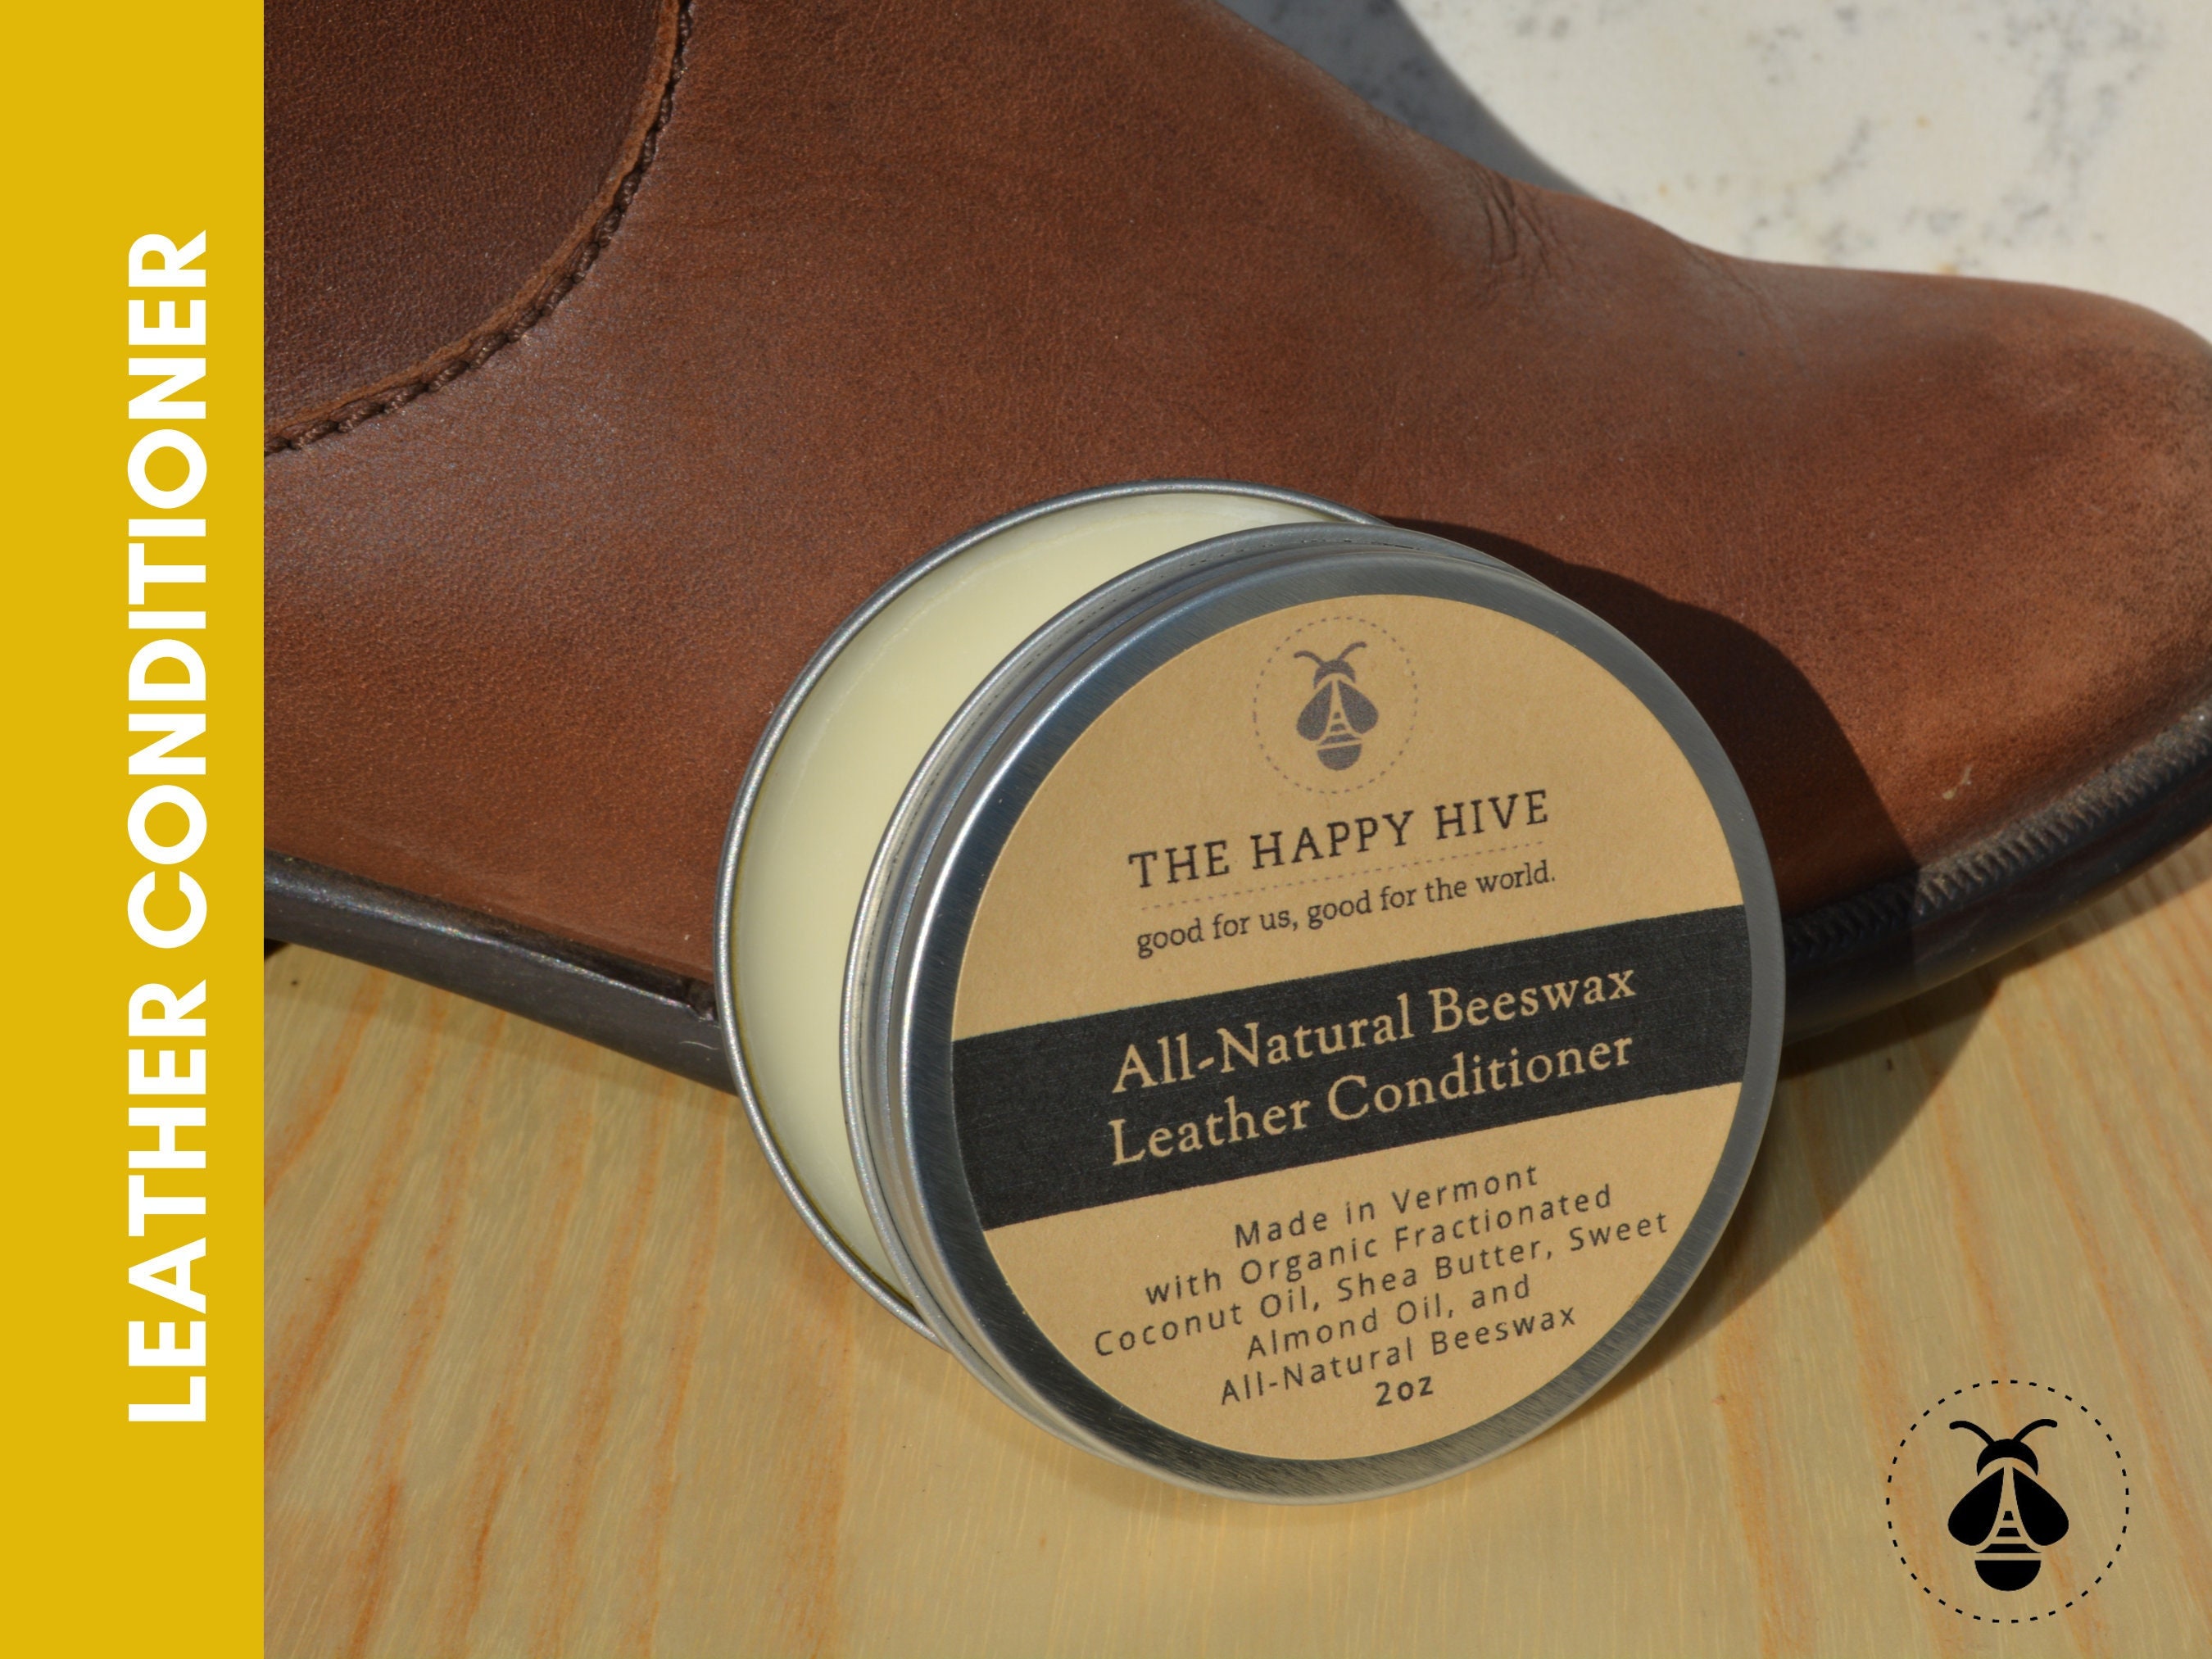 HappyHiveVT - Hand-poured Beeswax Home Products From Vermont 